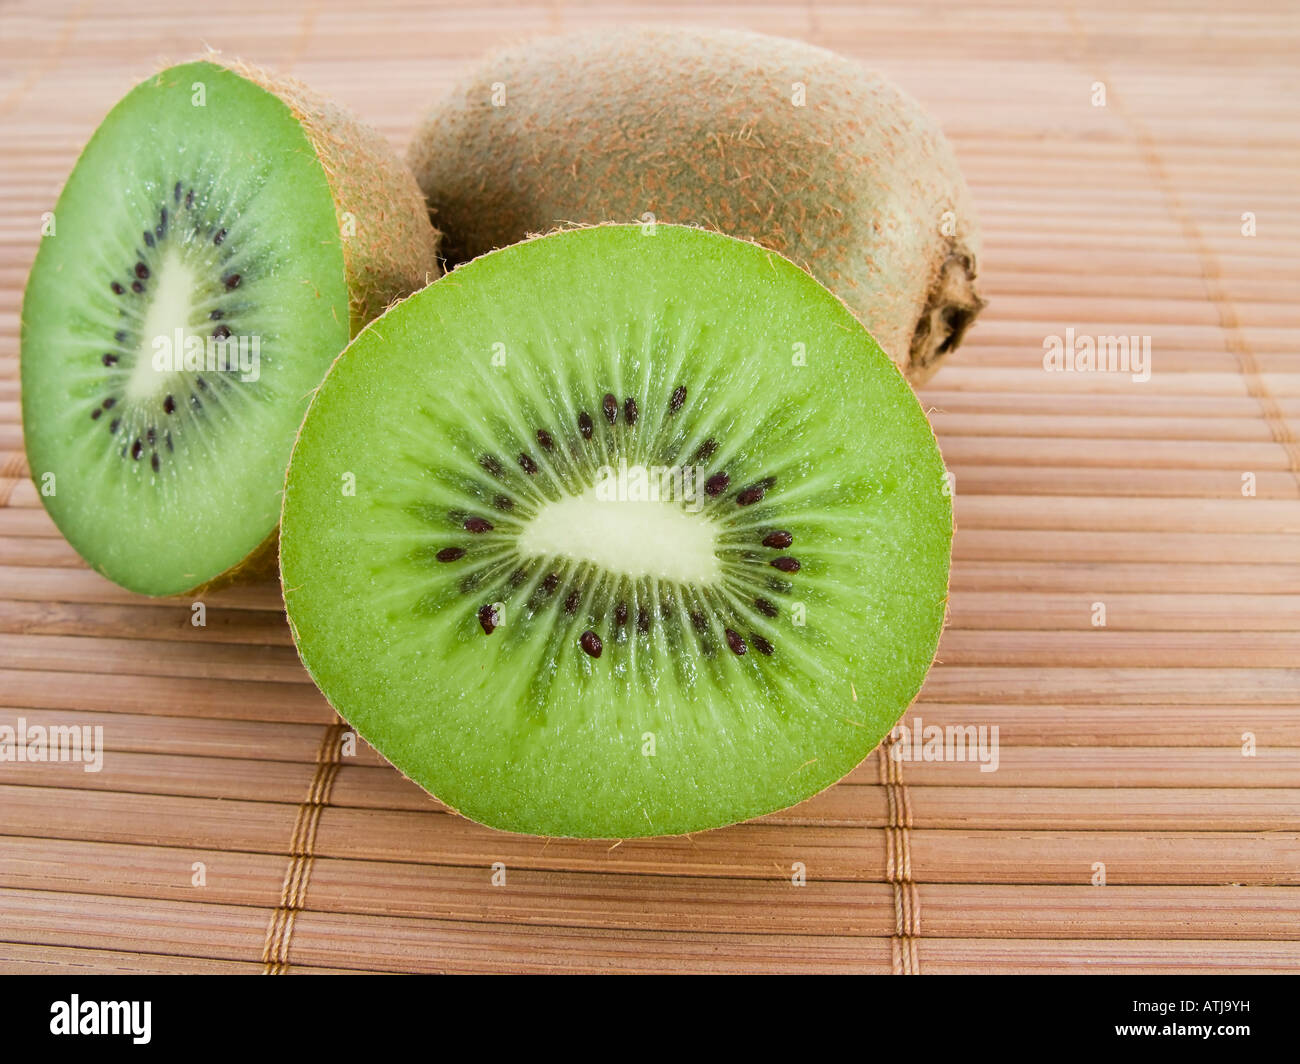 Two kiwis over a bamboo mat Stock Photo